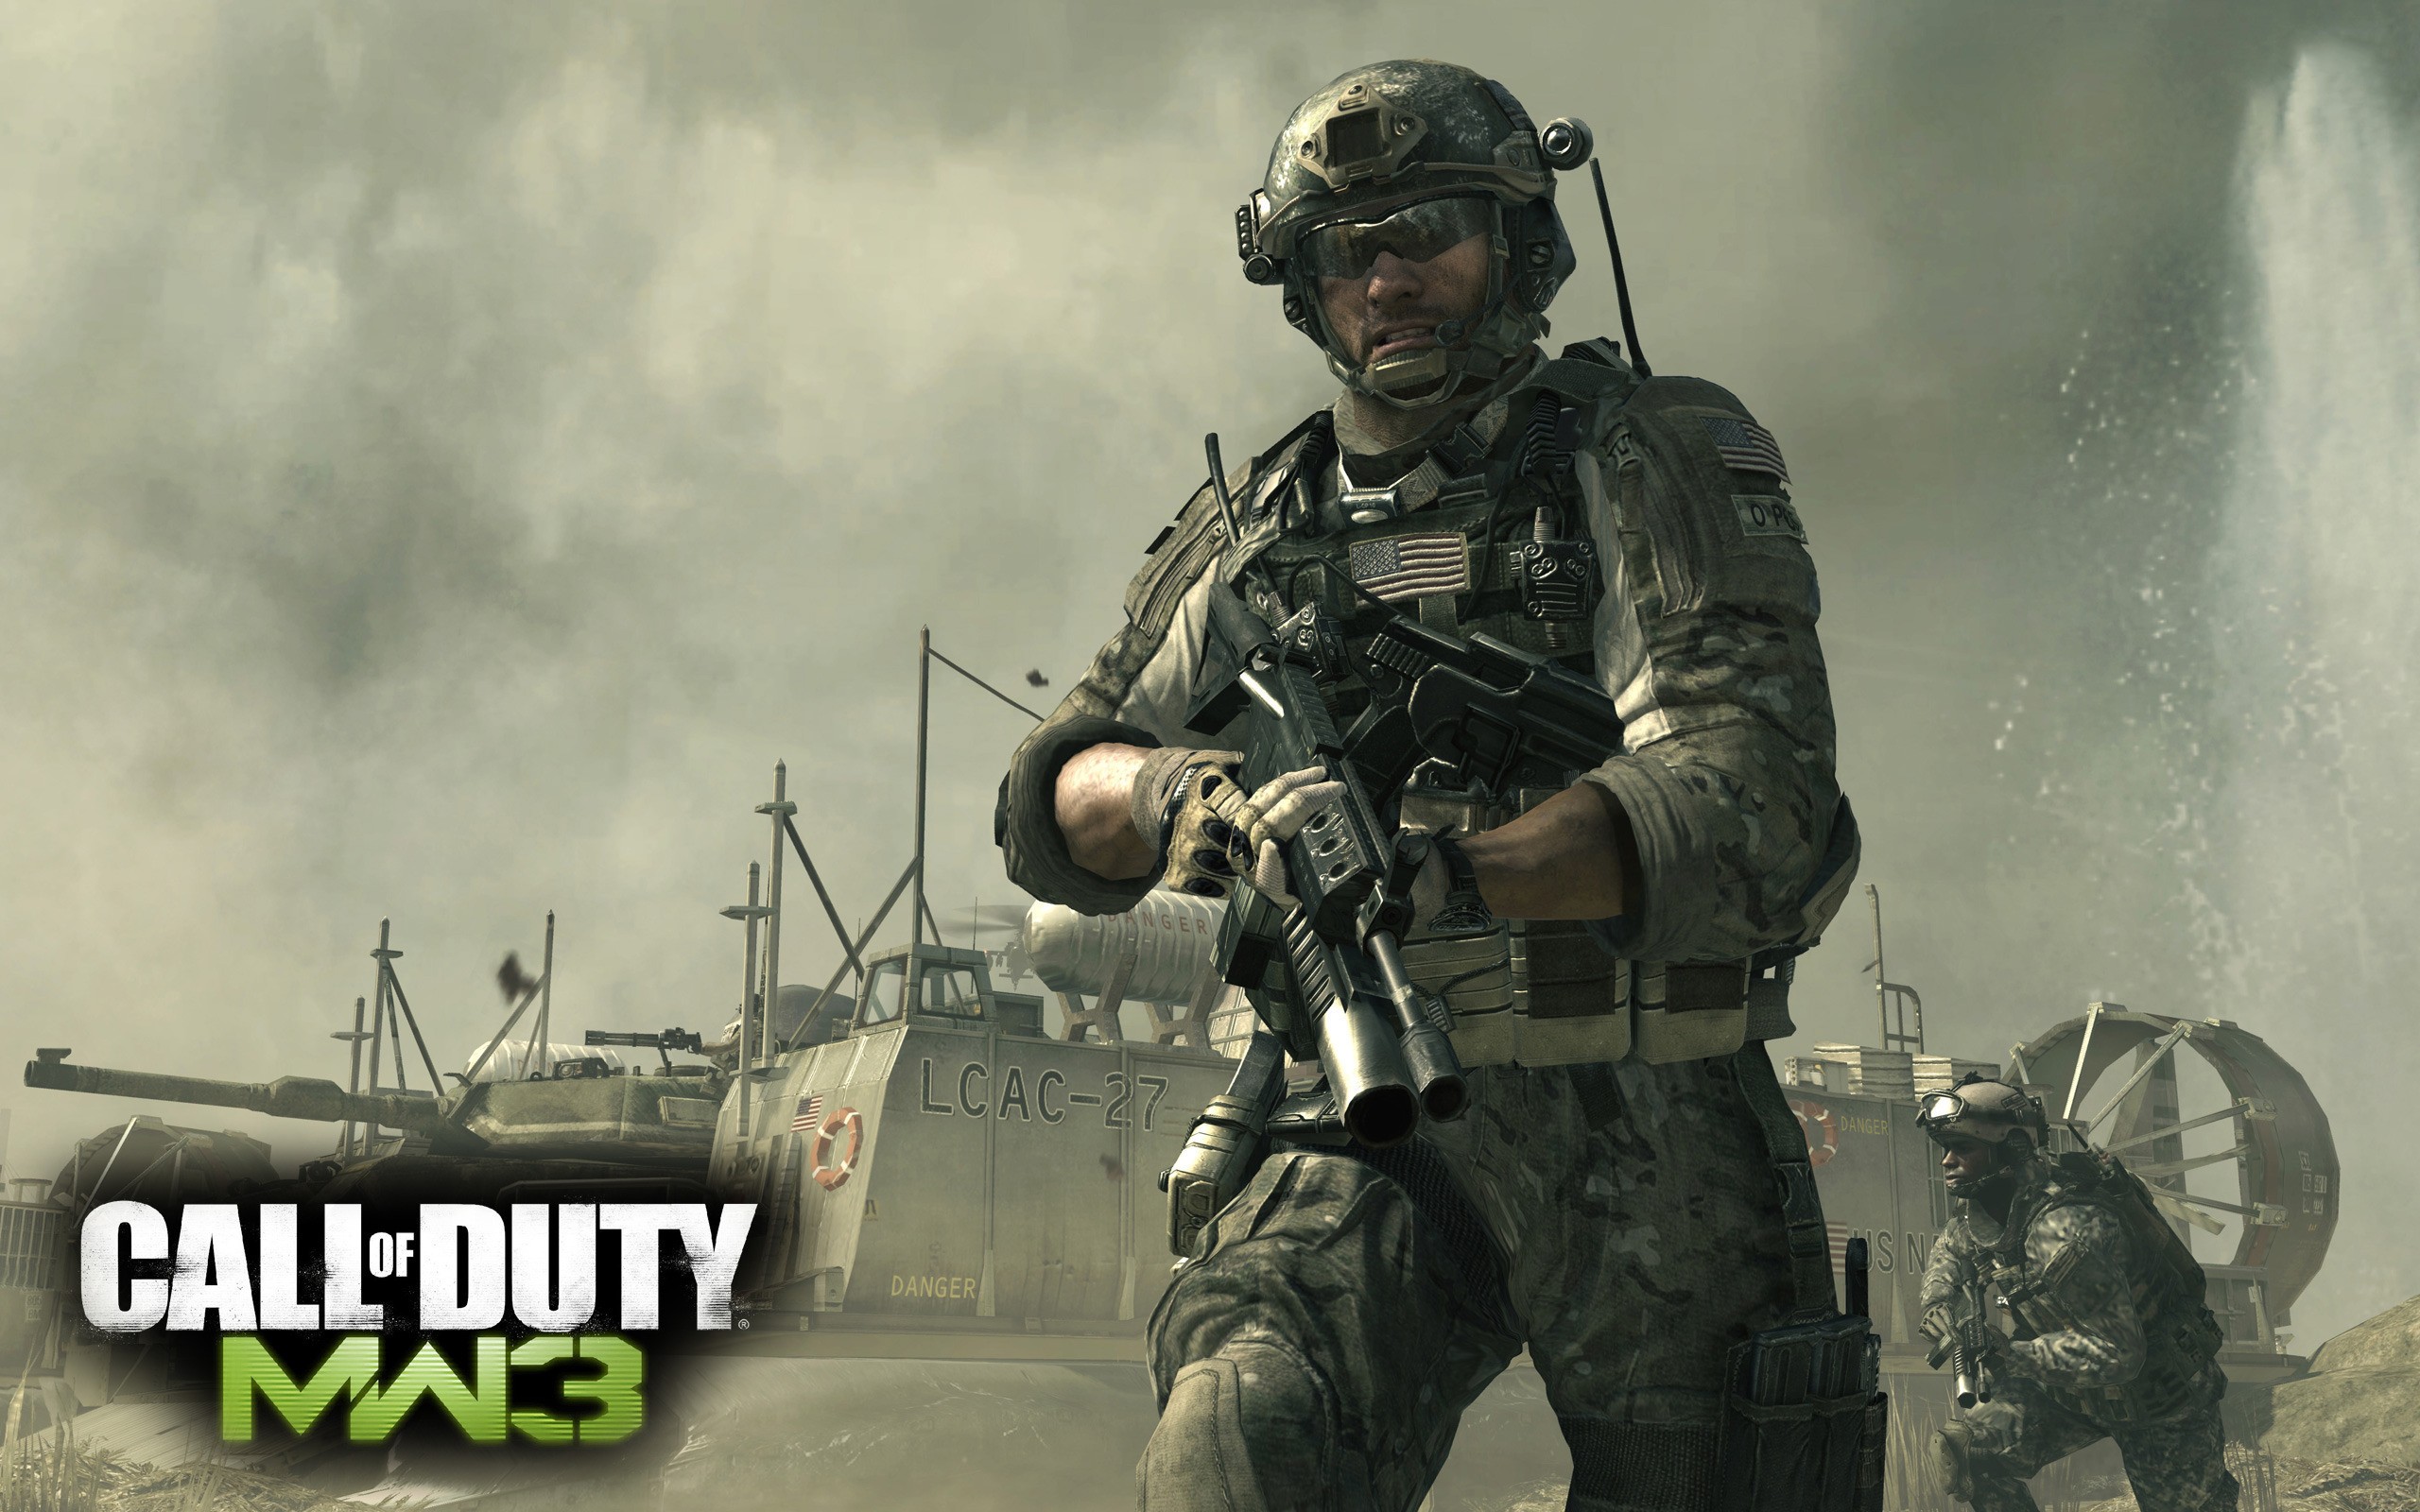 Call Of Duty Modern Warfare 3 Video Games Call Of Duty Soldier Military M4A1 2560x1600